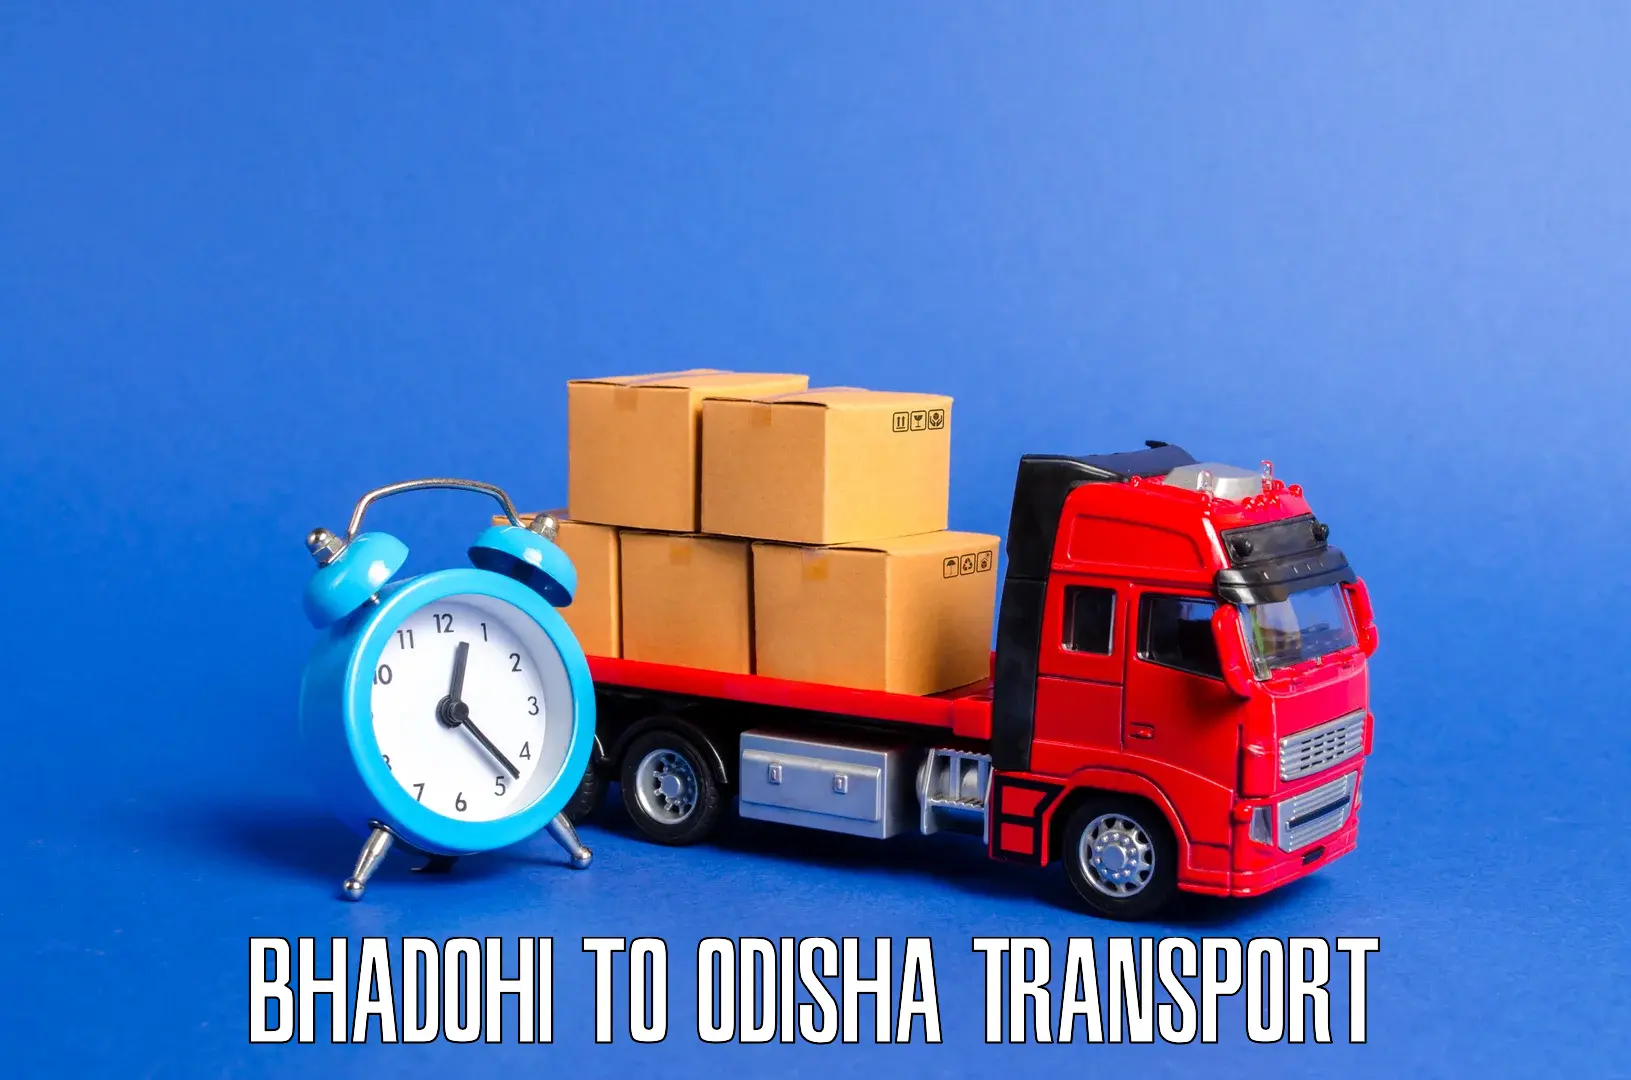 Package delivery services in Bhadohi to Bonth